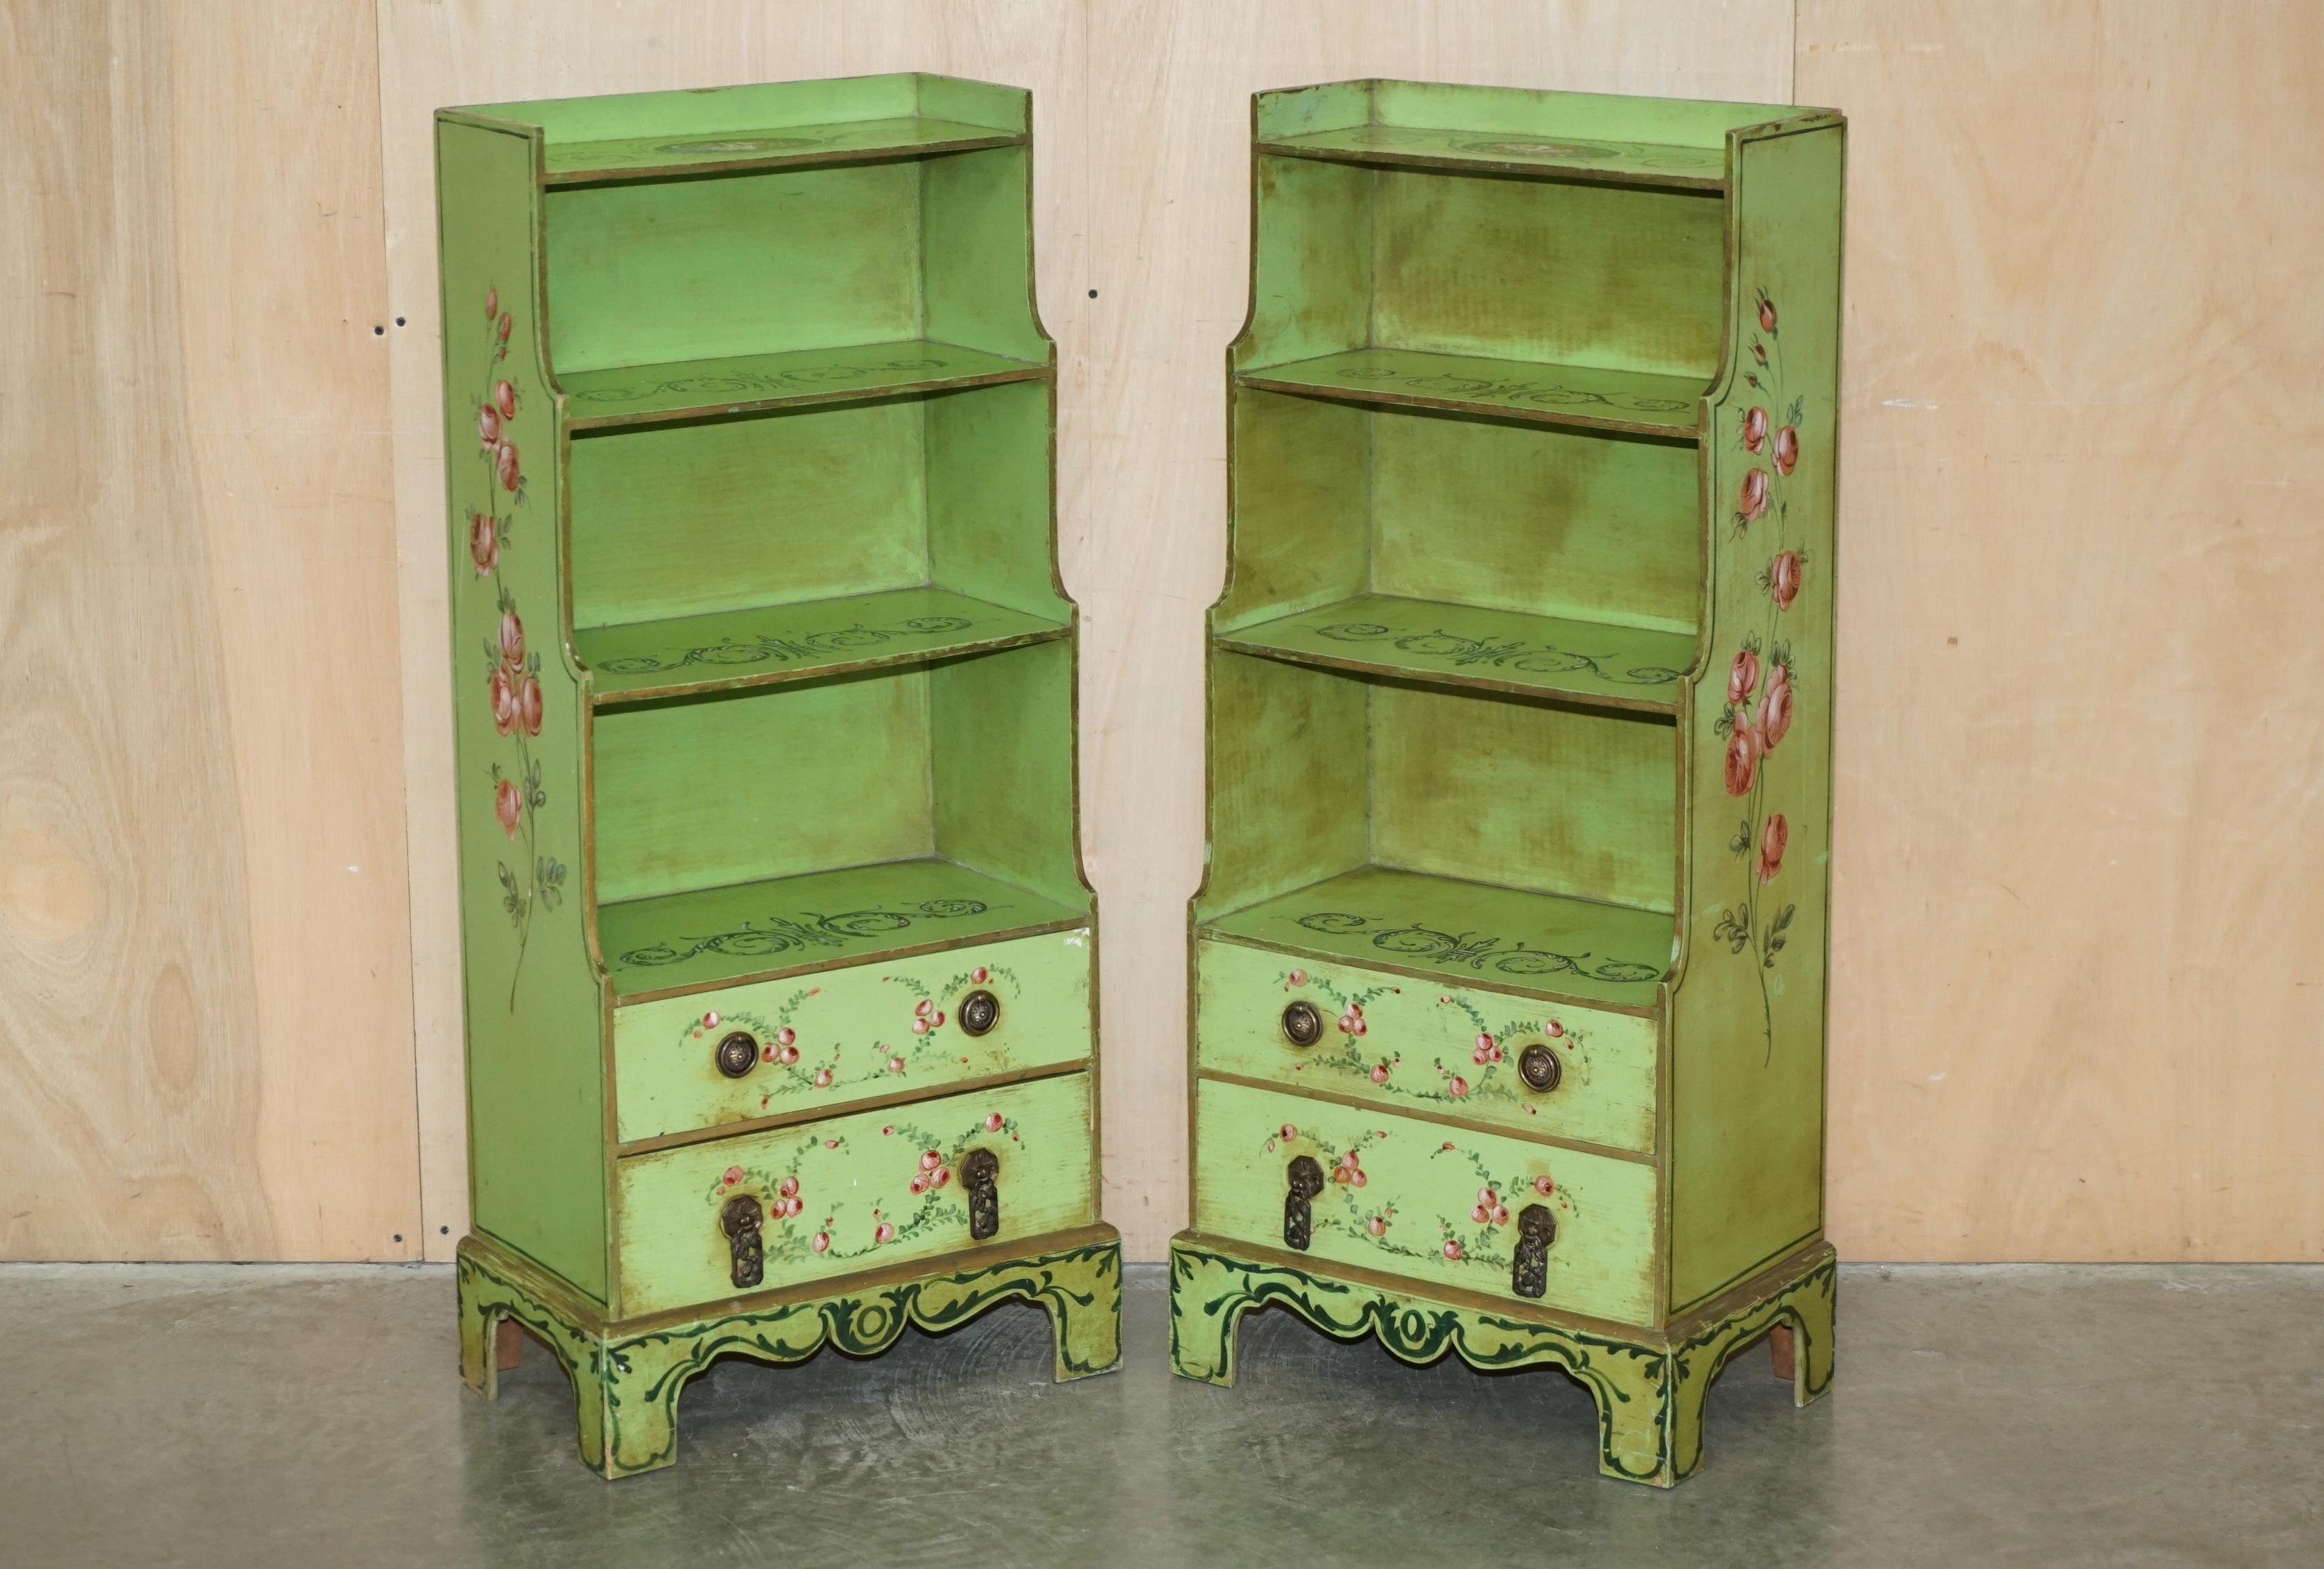 Royal House Antiques

Royal House Antiques is delighted to offer for sale this absolutely sublime pair of original Regency circa 1810-1820 Waterfall bookcases with drawers to the base and period, Sheraton Paint

Please note the delivery fee listed